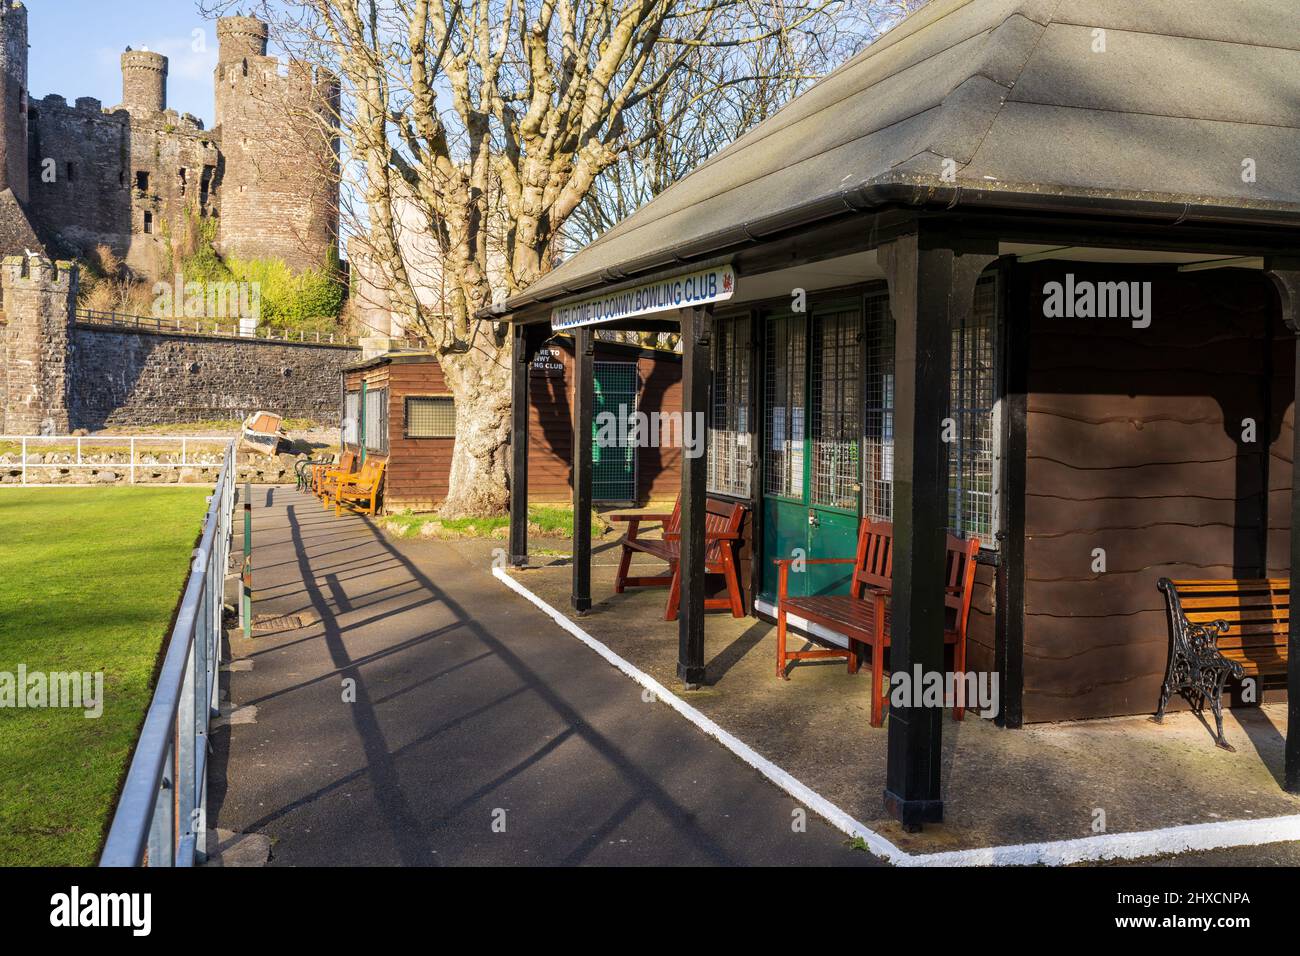 Conwy Wales UK March 2022 Conwy bowls club house and outside seating area with castle in background Stock Photo